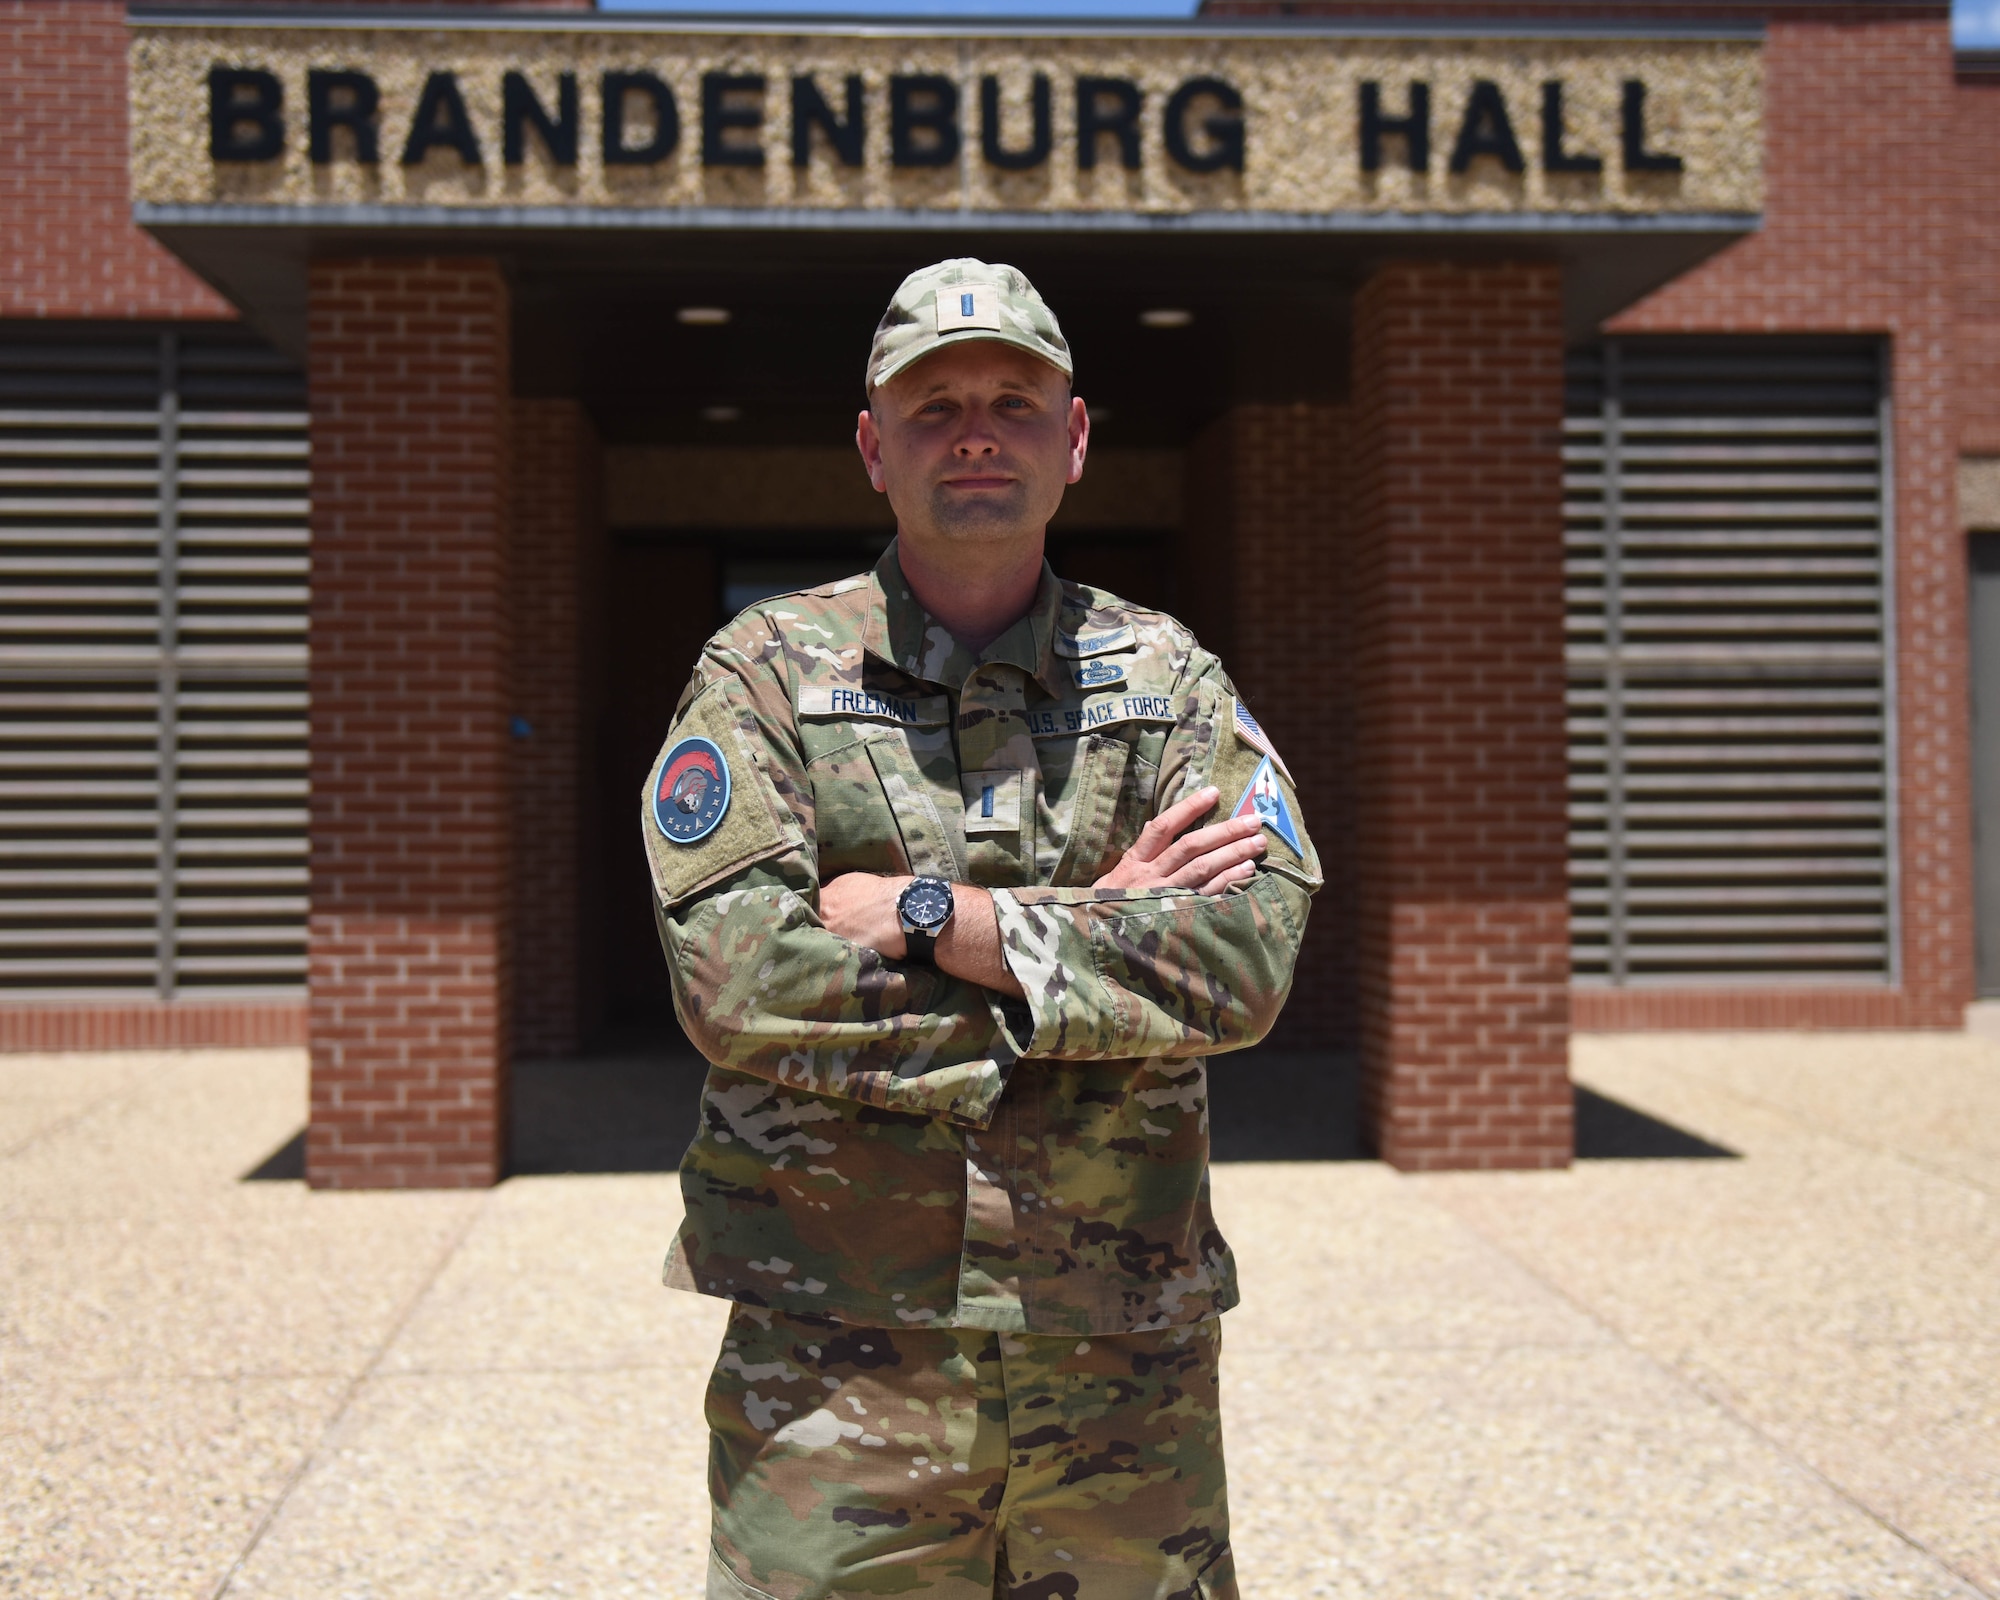 U.S. Space Force 1st Lt. Robert Freeman, 533rd Training Squadron Detachment 1 chief, poses for a photo in front of Brandenburg Hall at Goodfellow Air Force Base, Texas, Aug. 2, 2022. Freeman took responsibility of the 533rd TRS Det 1, June 21. (U.S. Air Force photo by Airman 1st Class Sarah Williams)